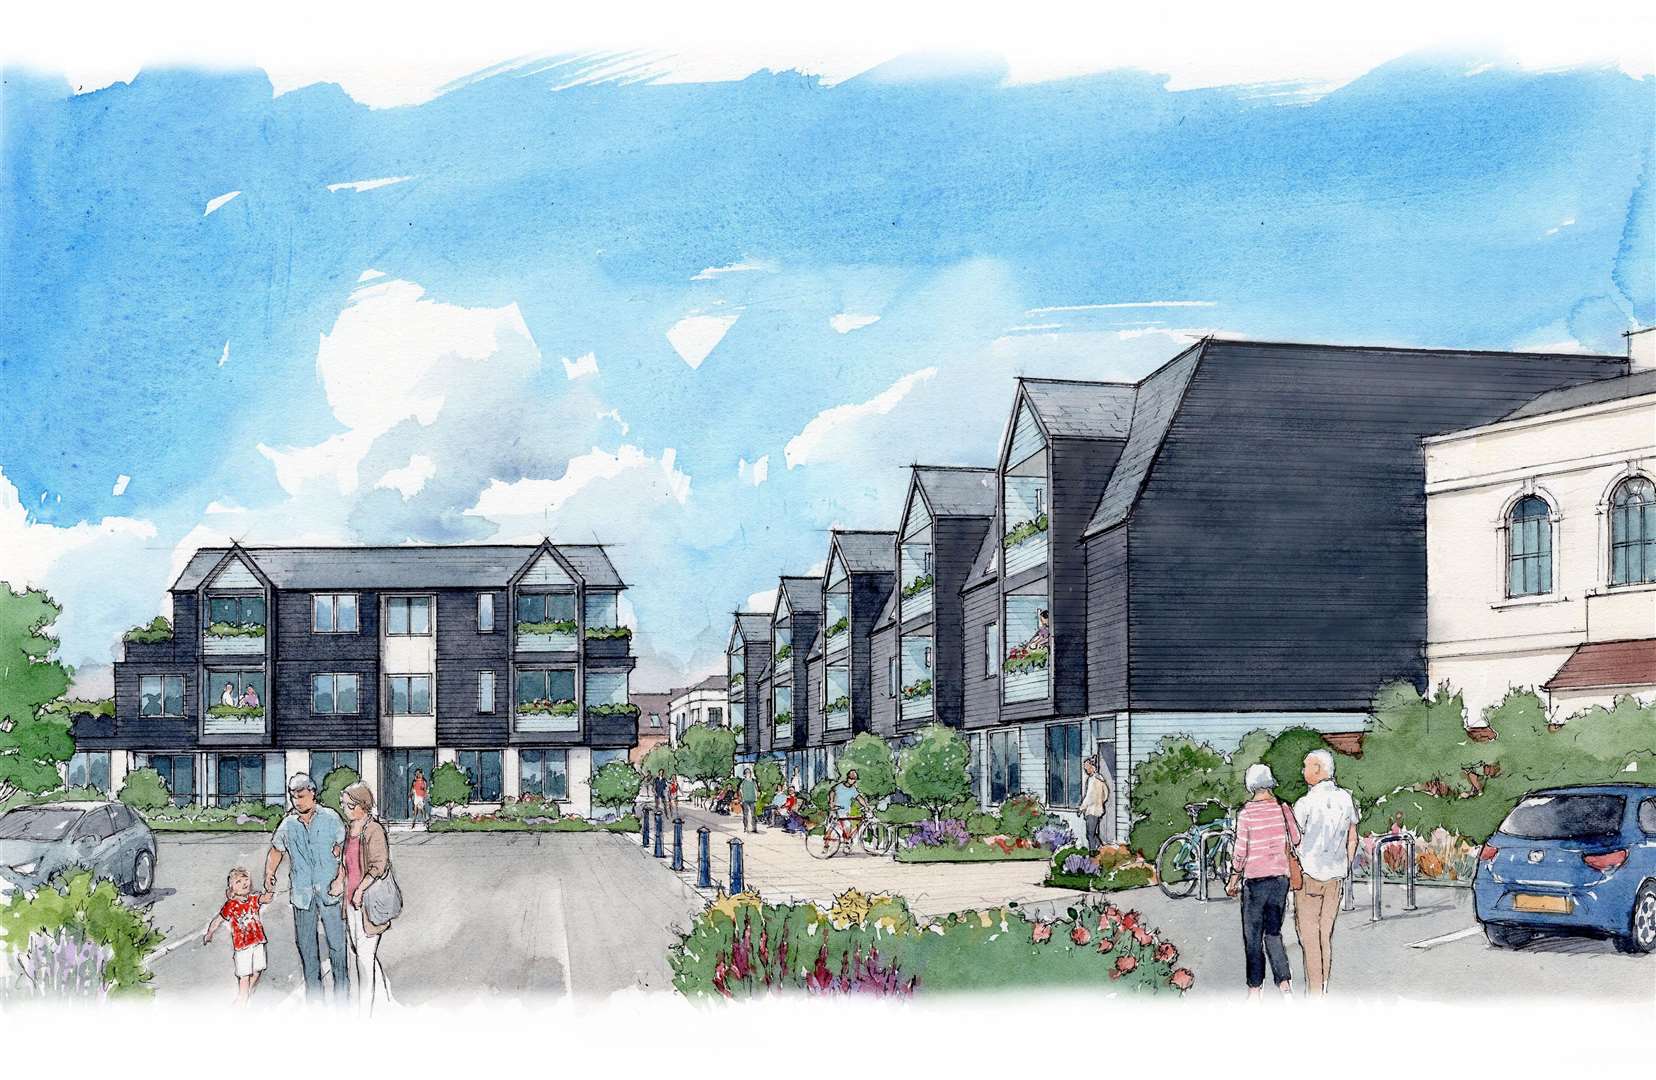 Revised designs were submitted for the former Aldi store following backlash from the Hythe Civic SocietyPicture: In5 Group